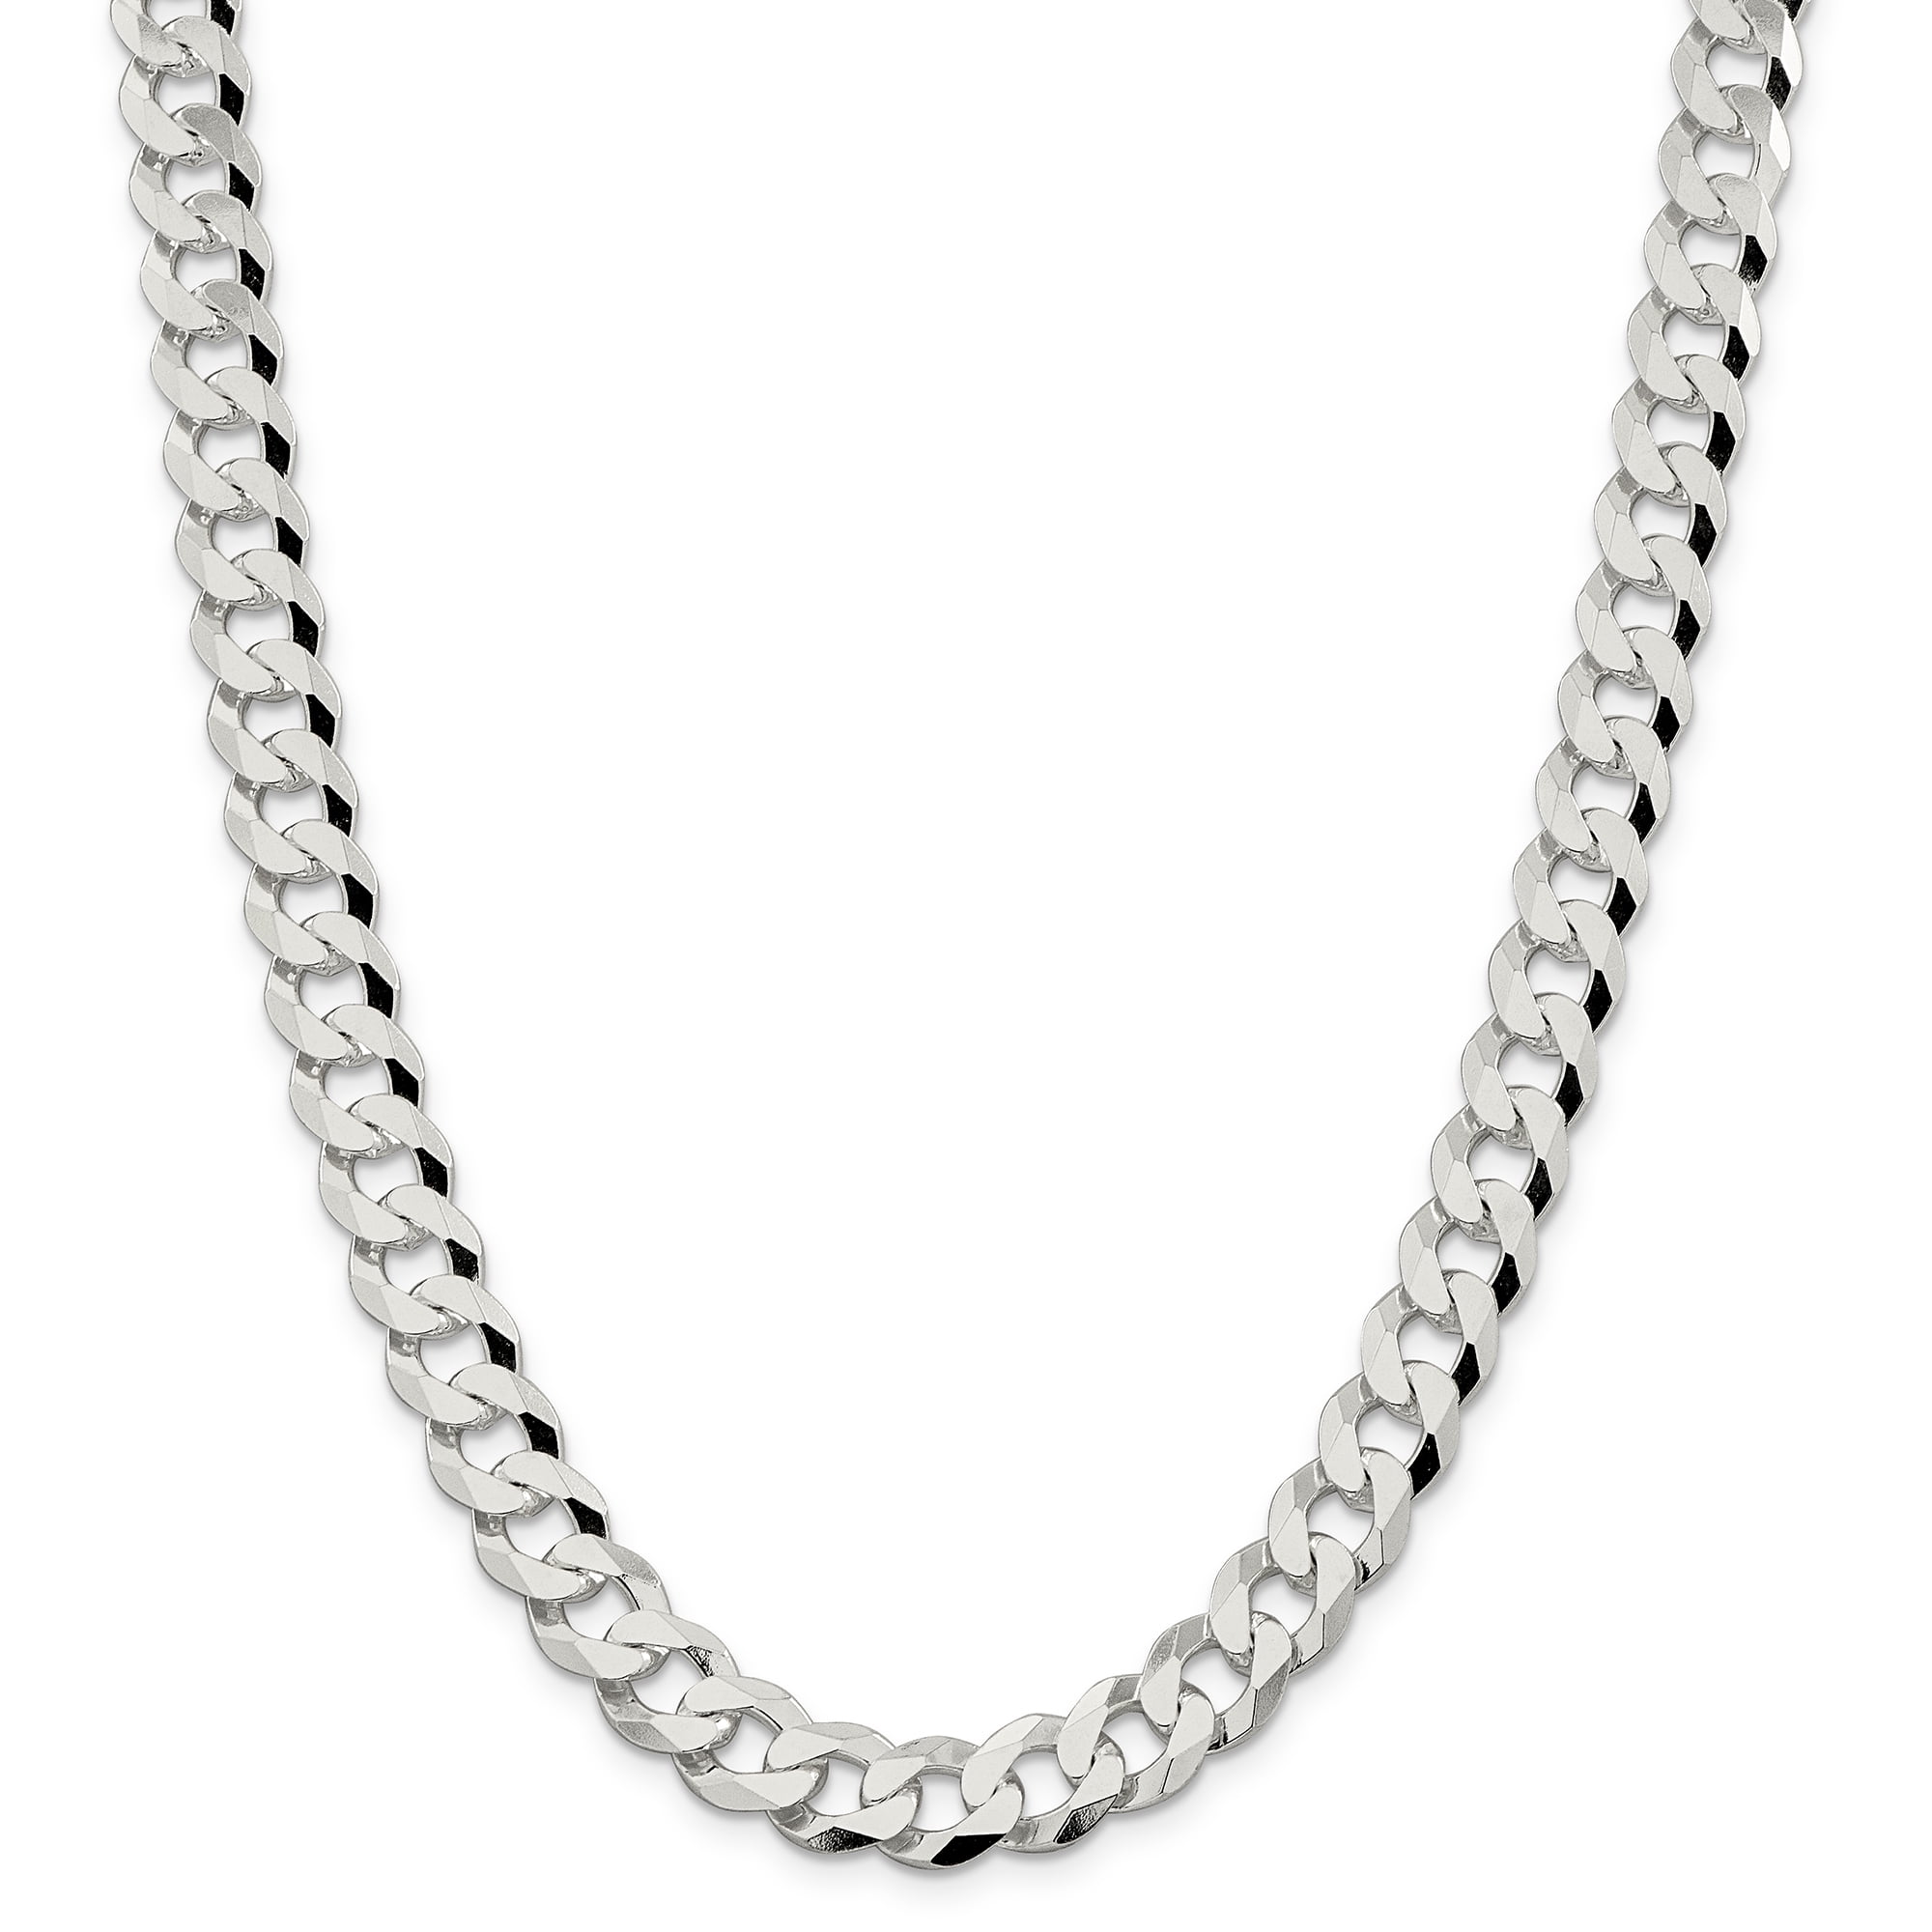 CHAIN CURB 18" INCH SOLID STERLING SILVER 925 ADULTS DELICATE YET STRONG STAMPED 